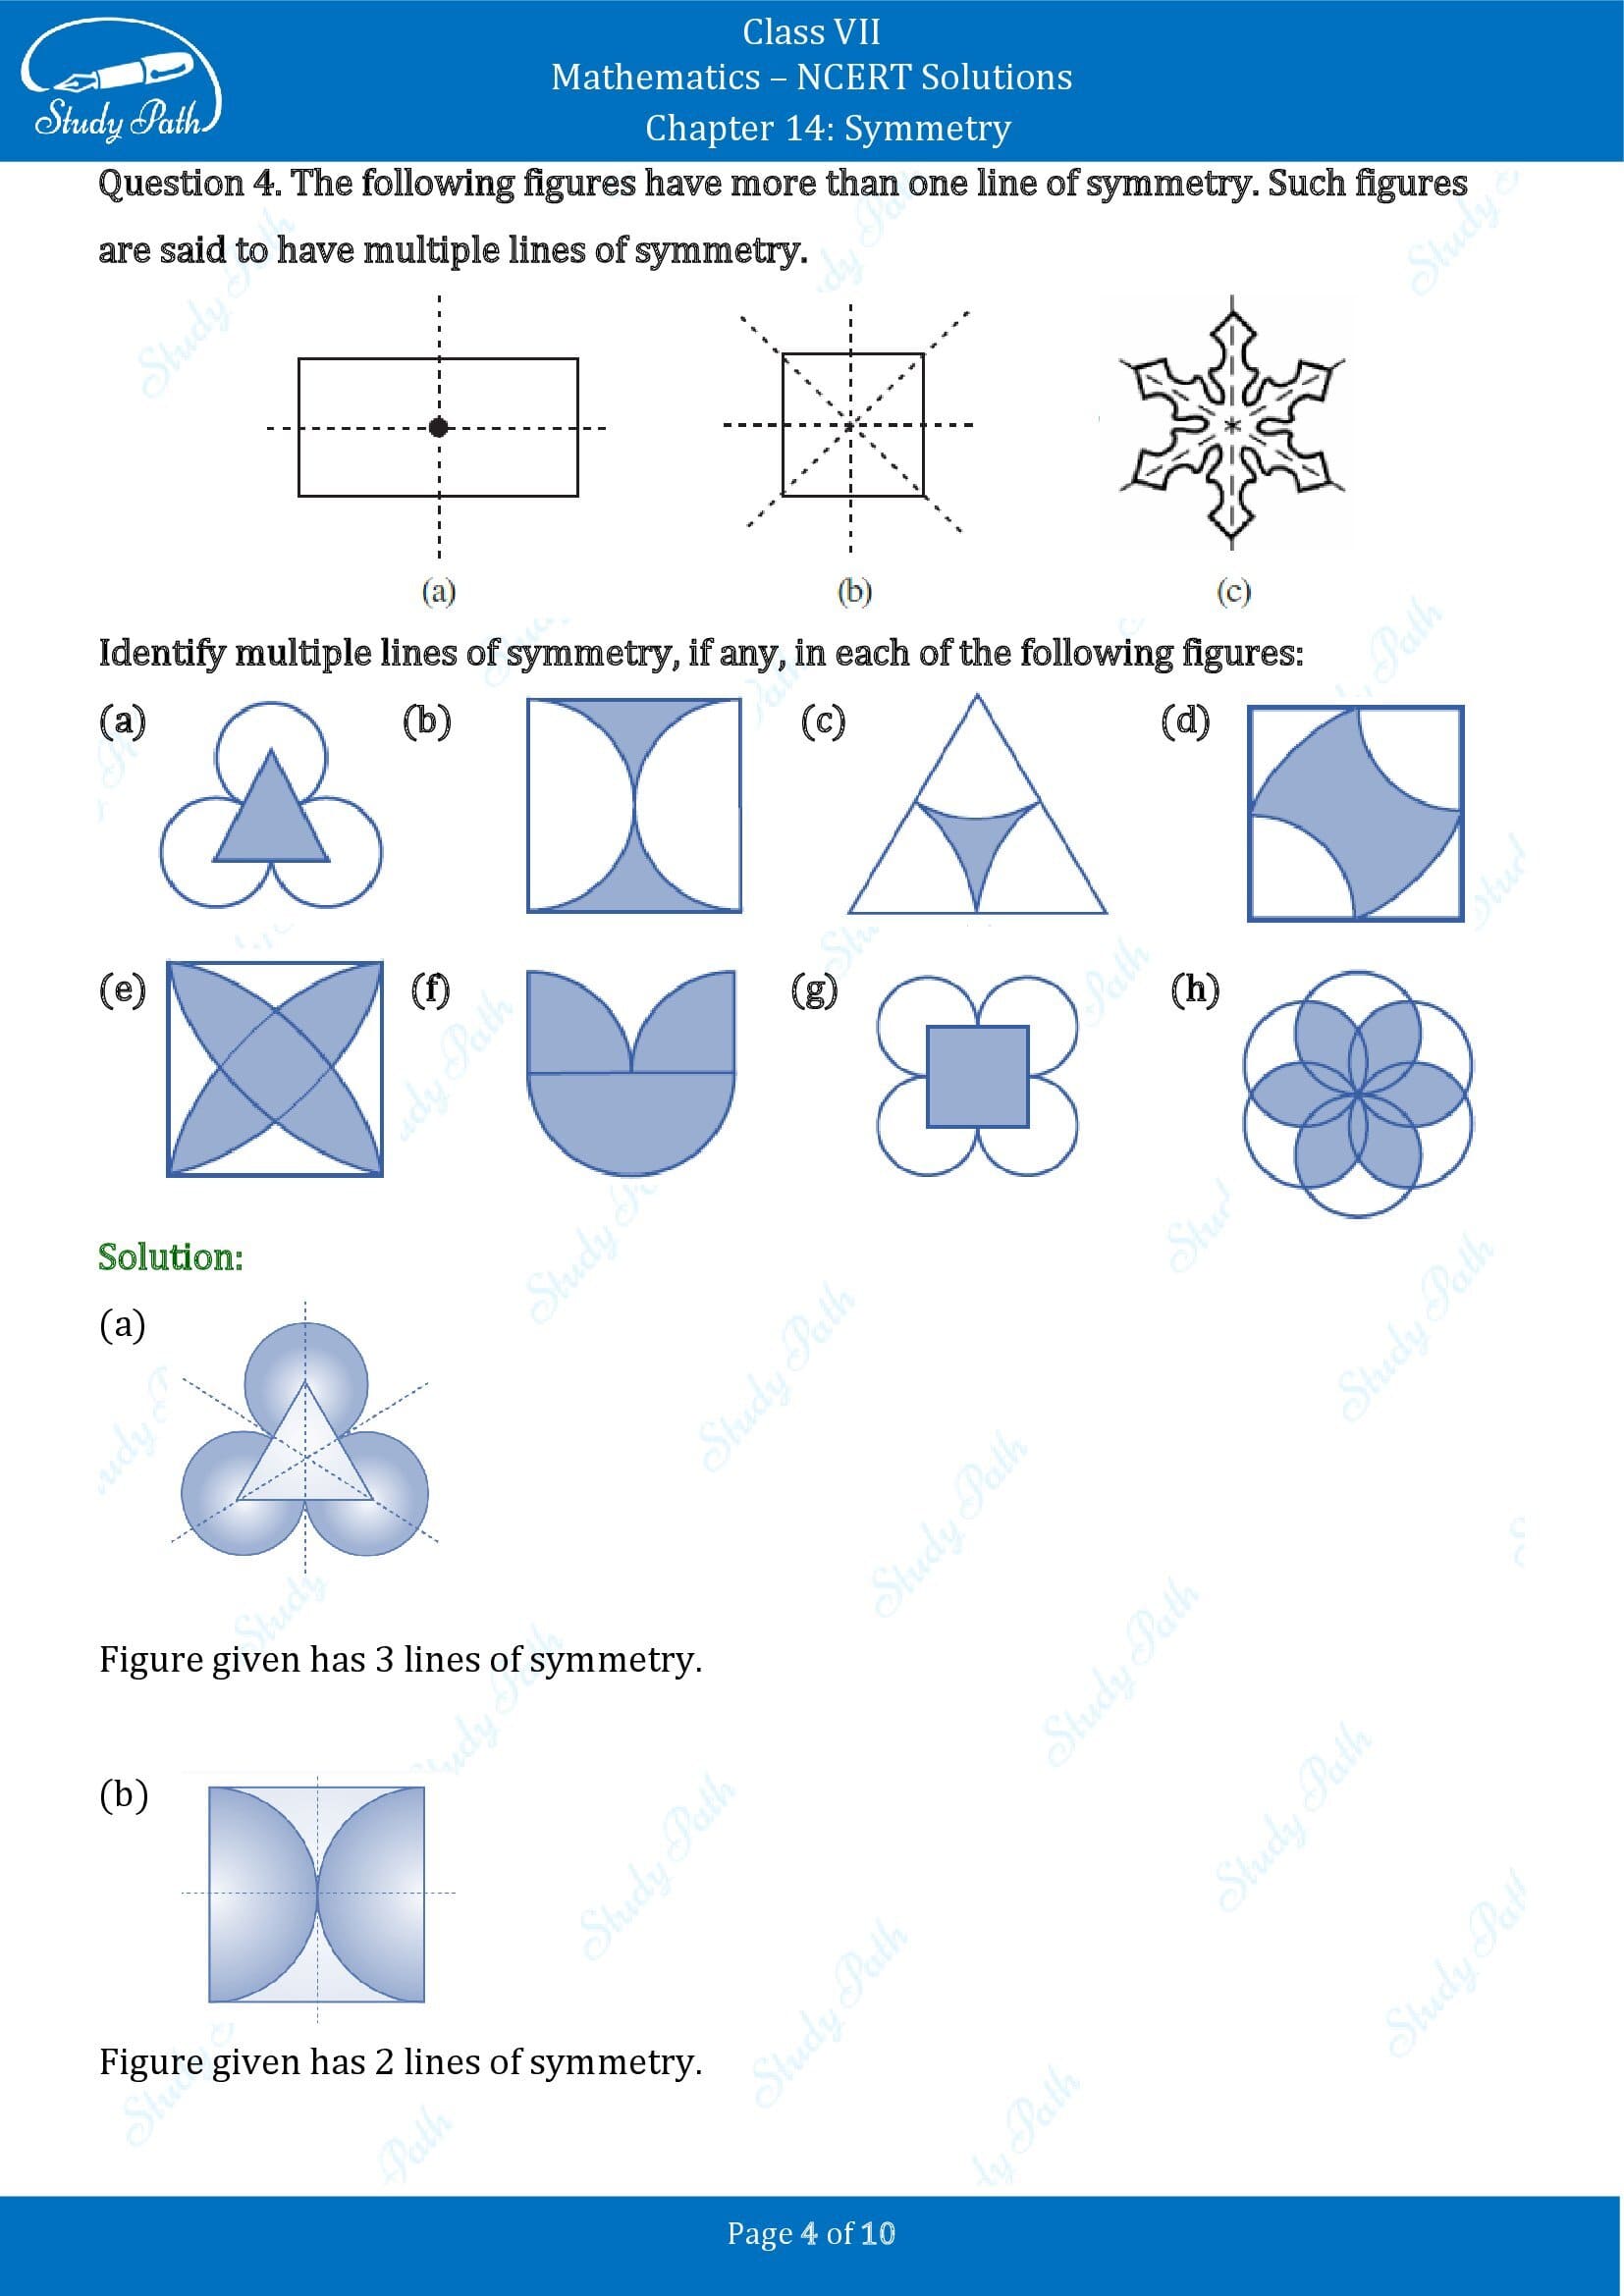 NCERT Solutions for Class 7 Maths Chapter 14 Symmetry Exercise 14.1 00004